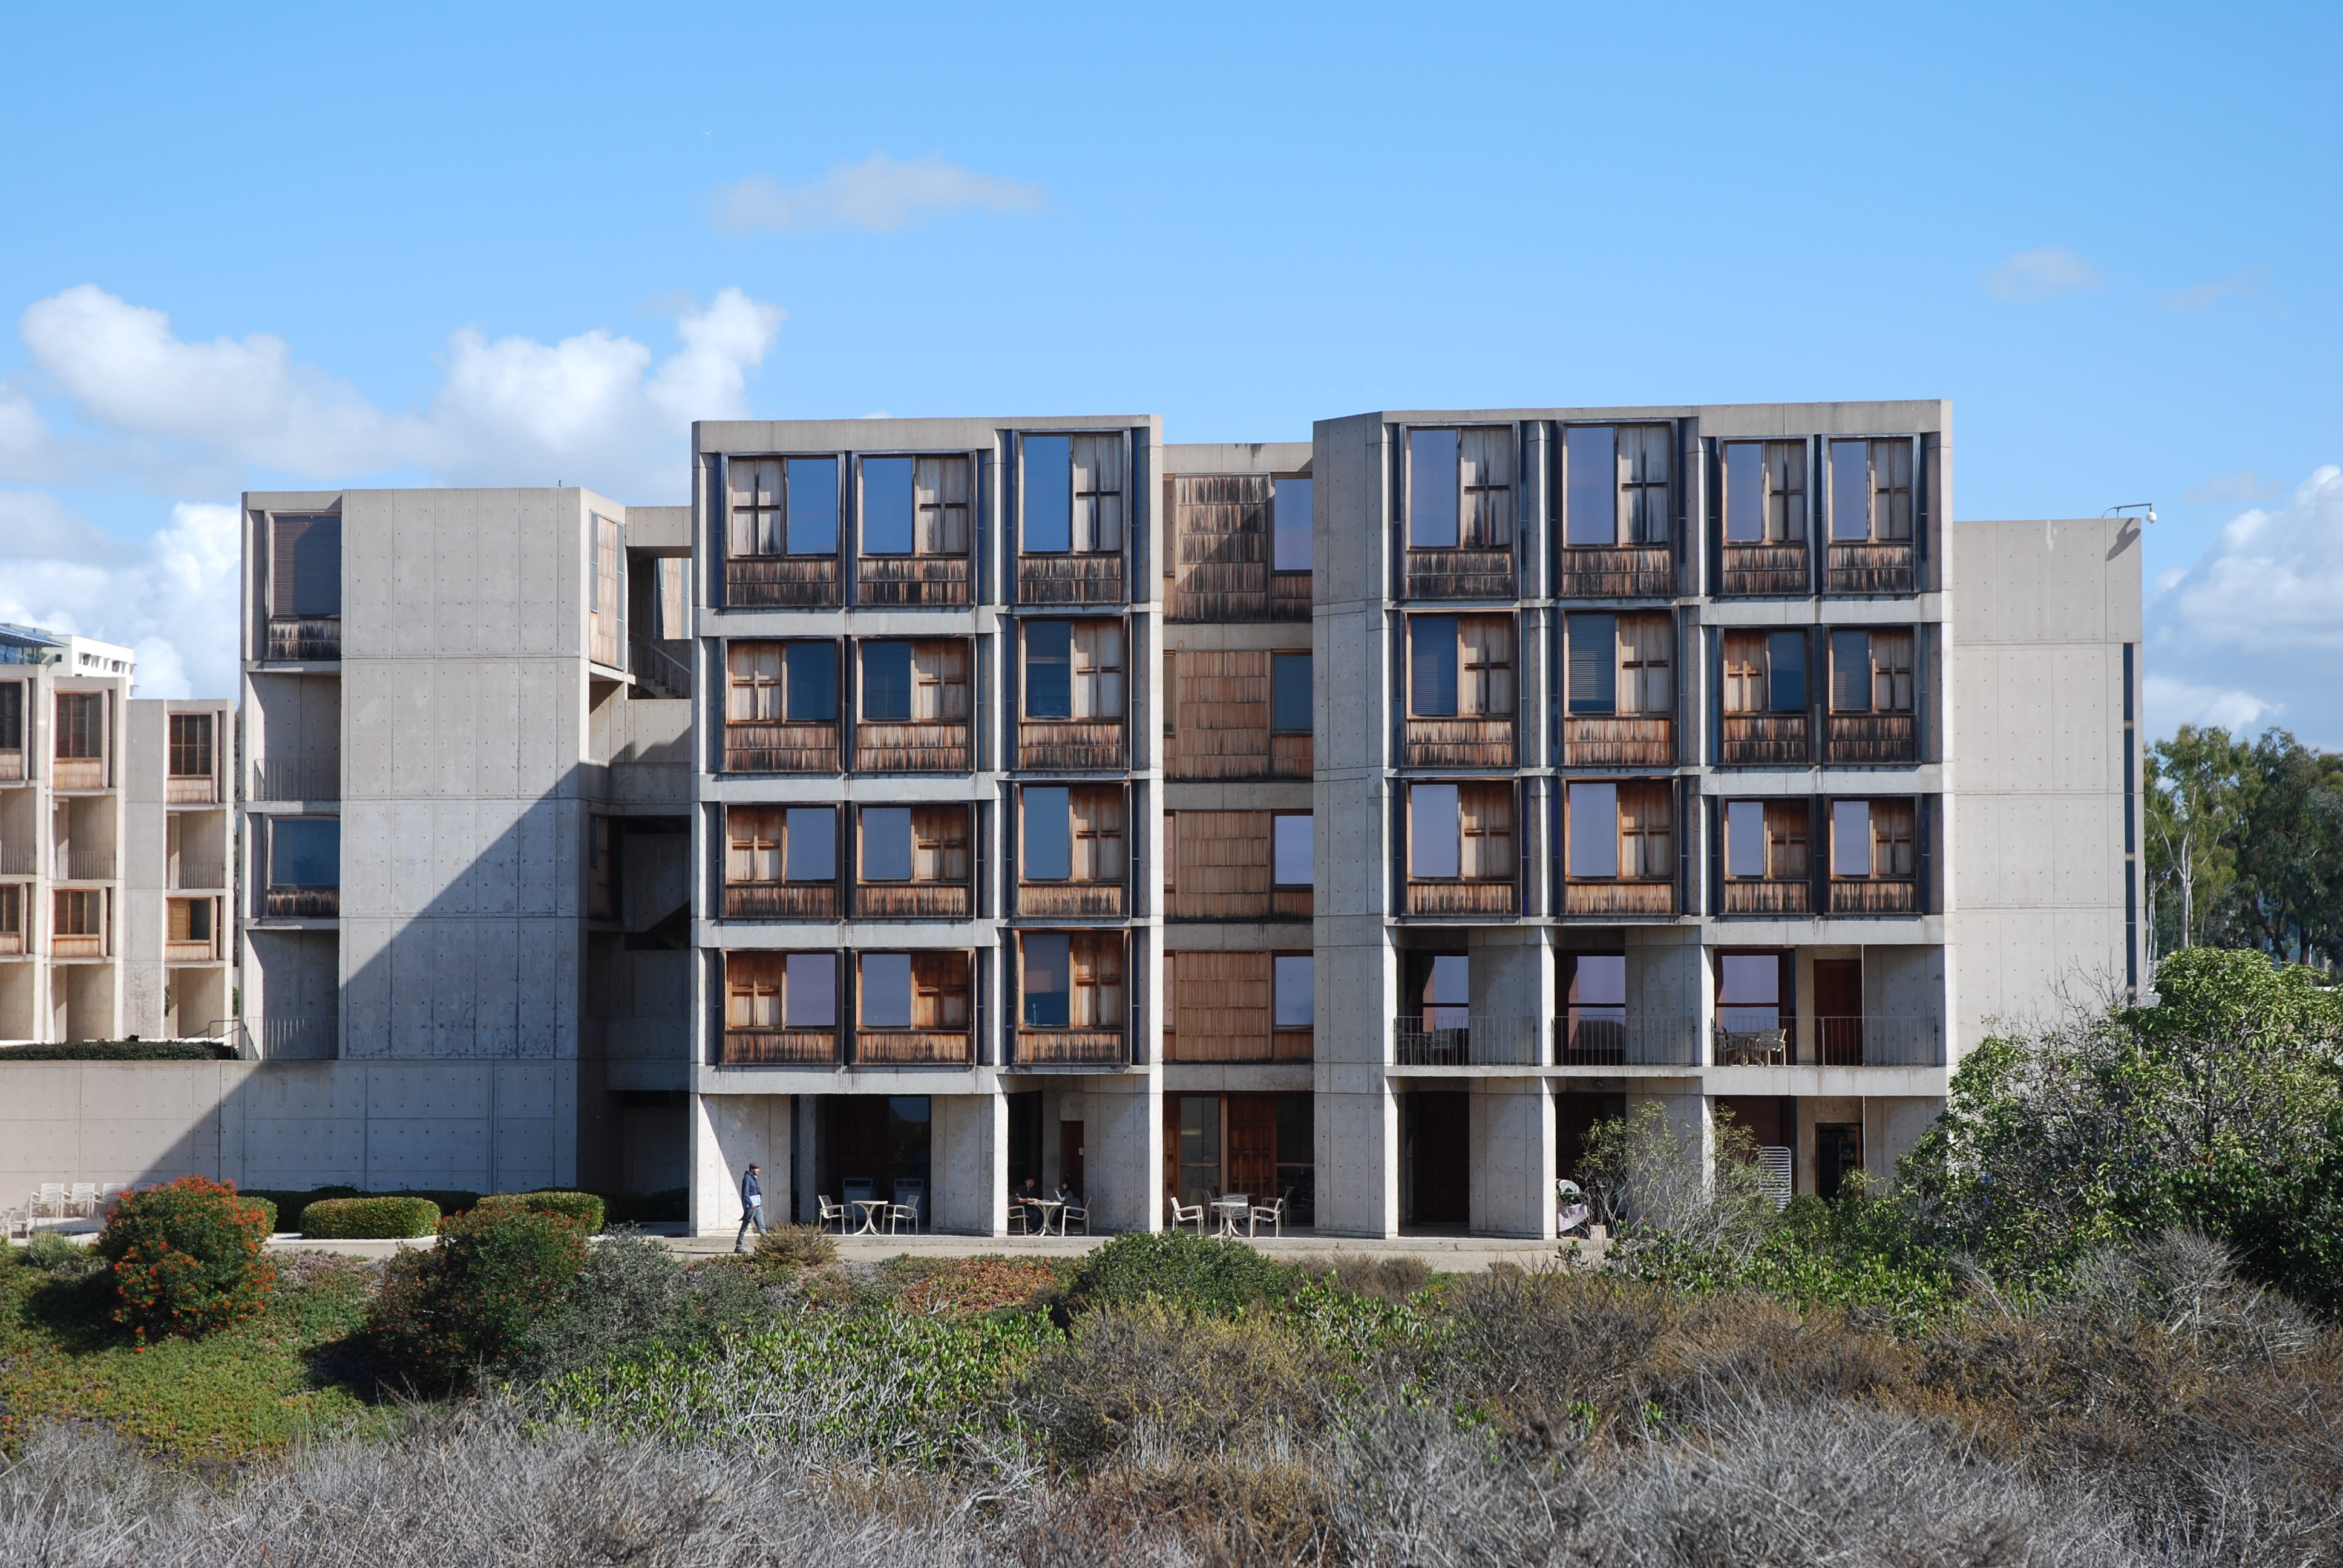 The Salk Institute (Front View) Editorial Photography - Image of